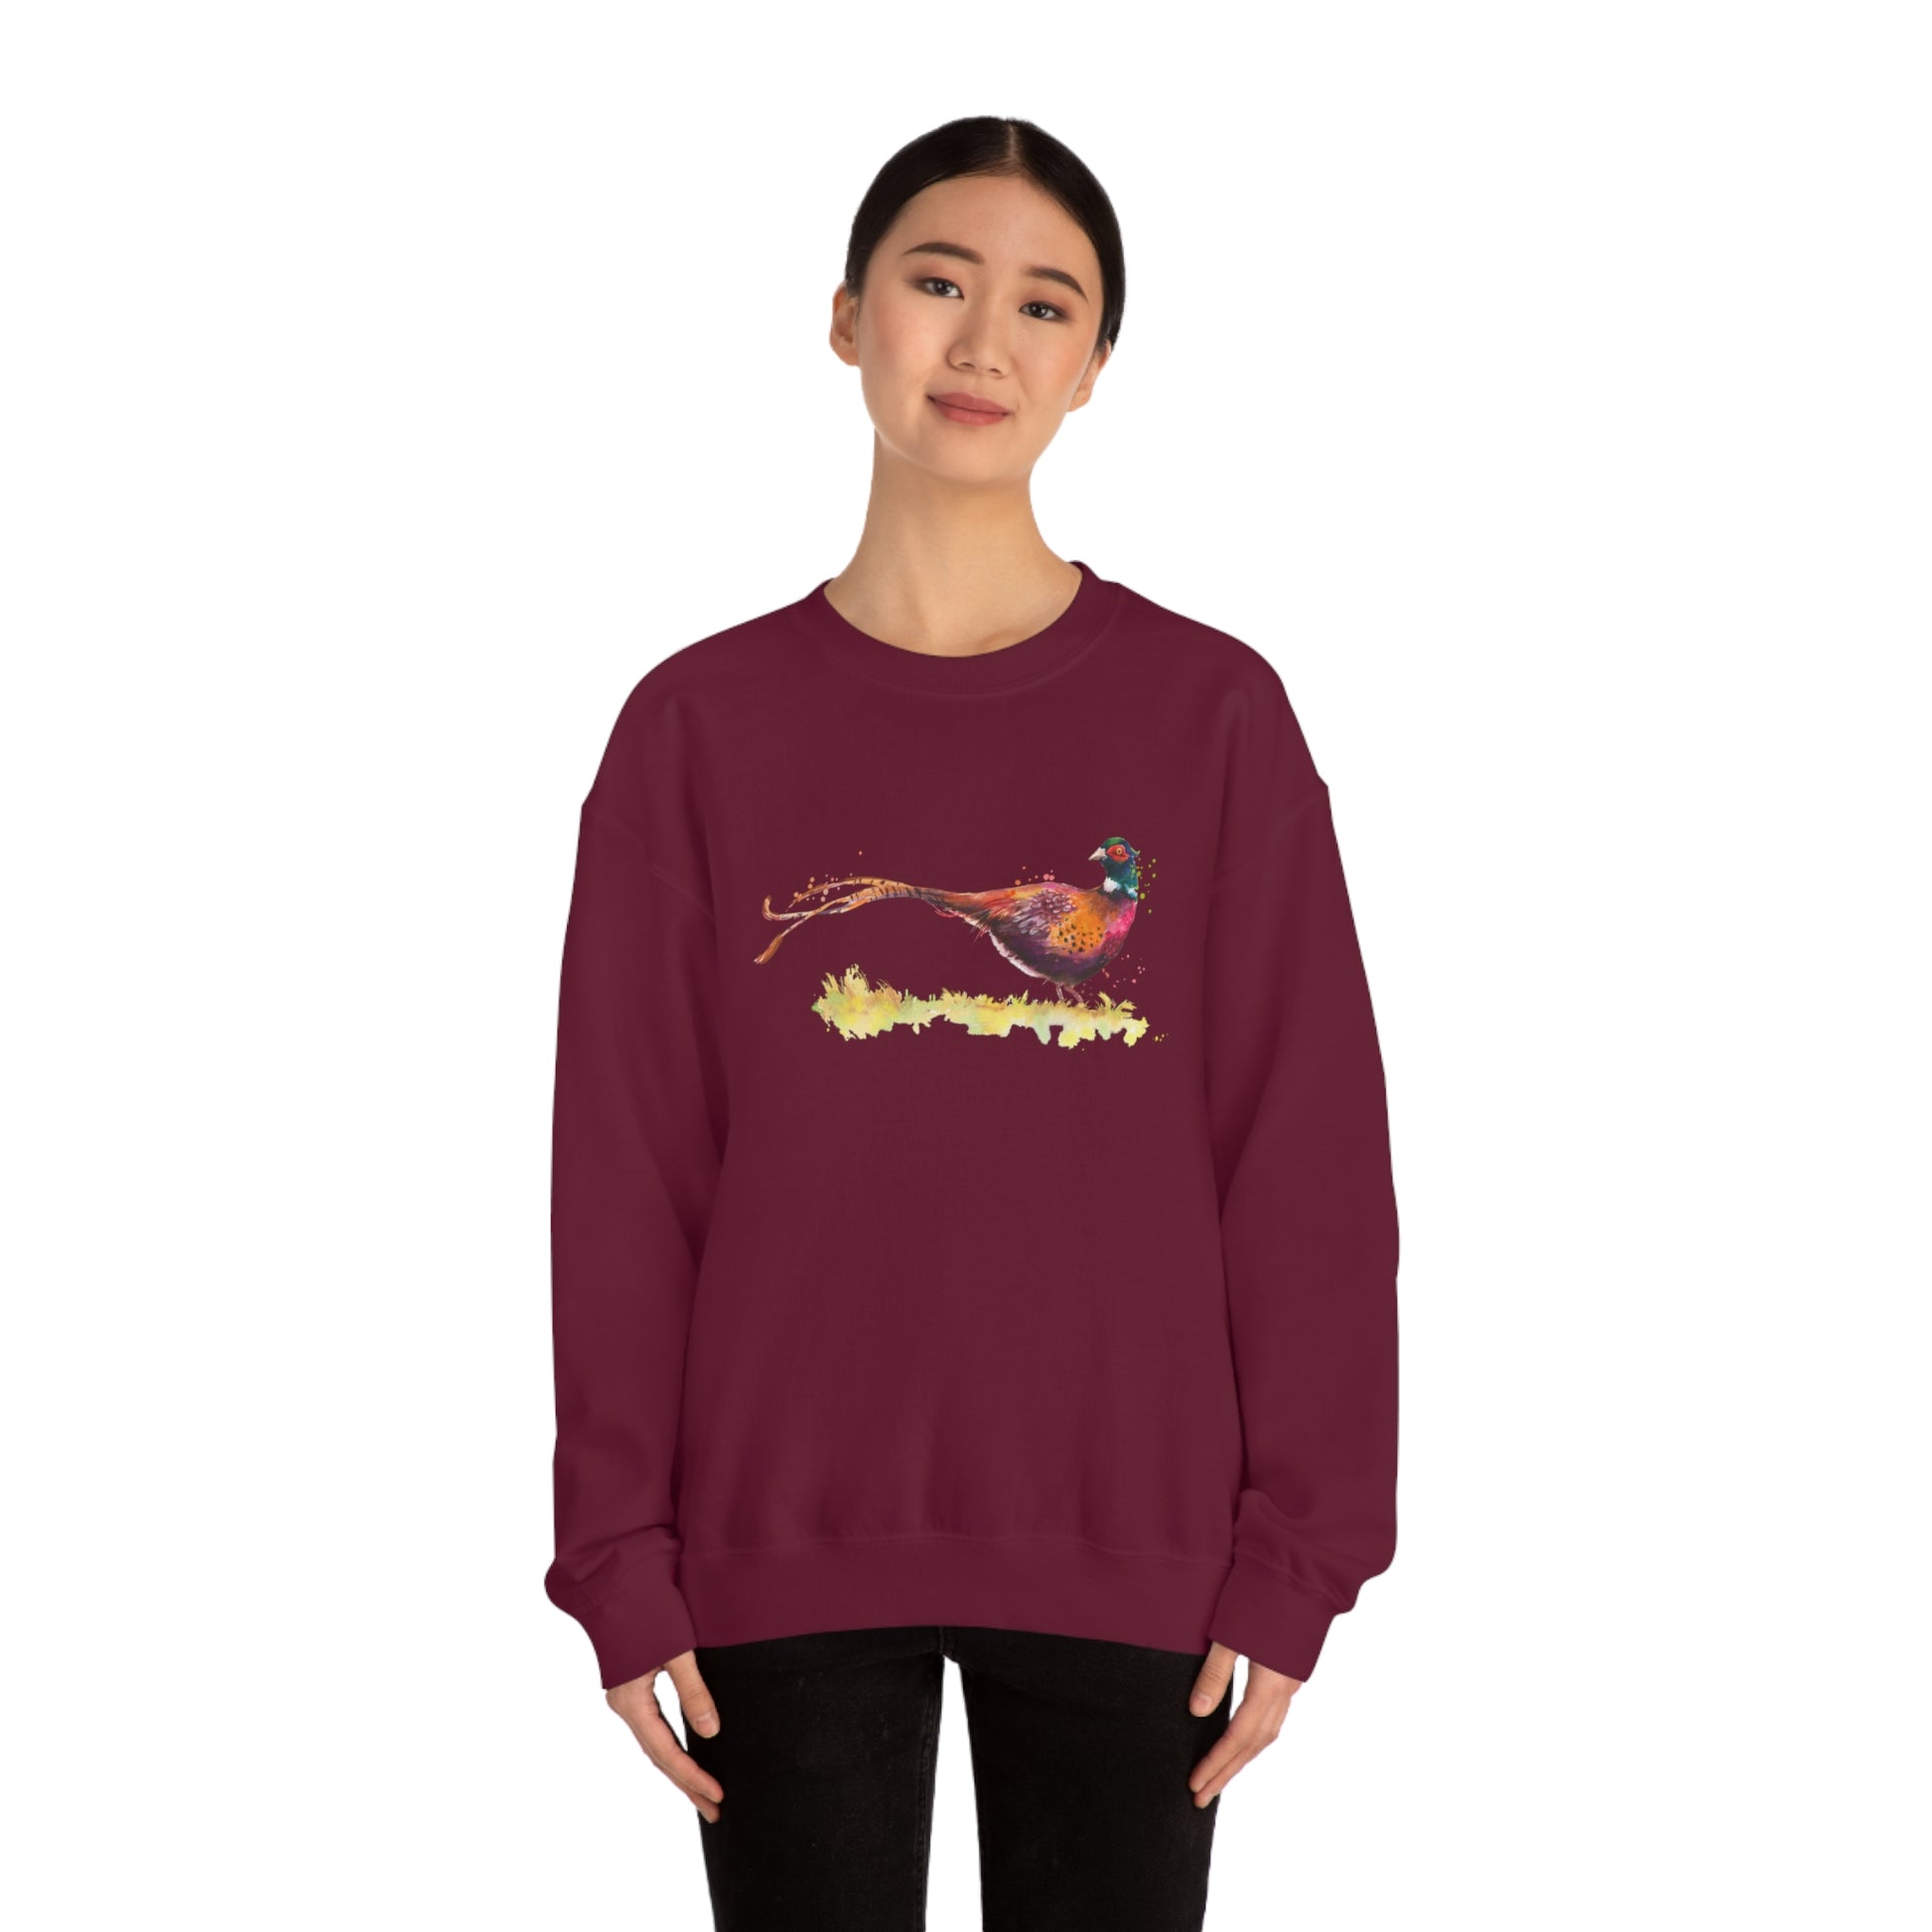 Mock up of a slender woman wearing the Maroon shirt